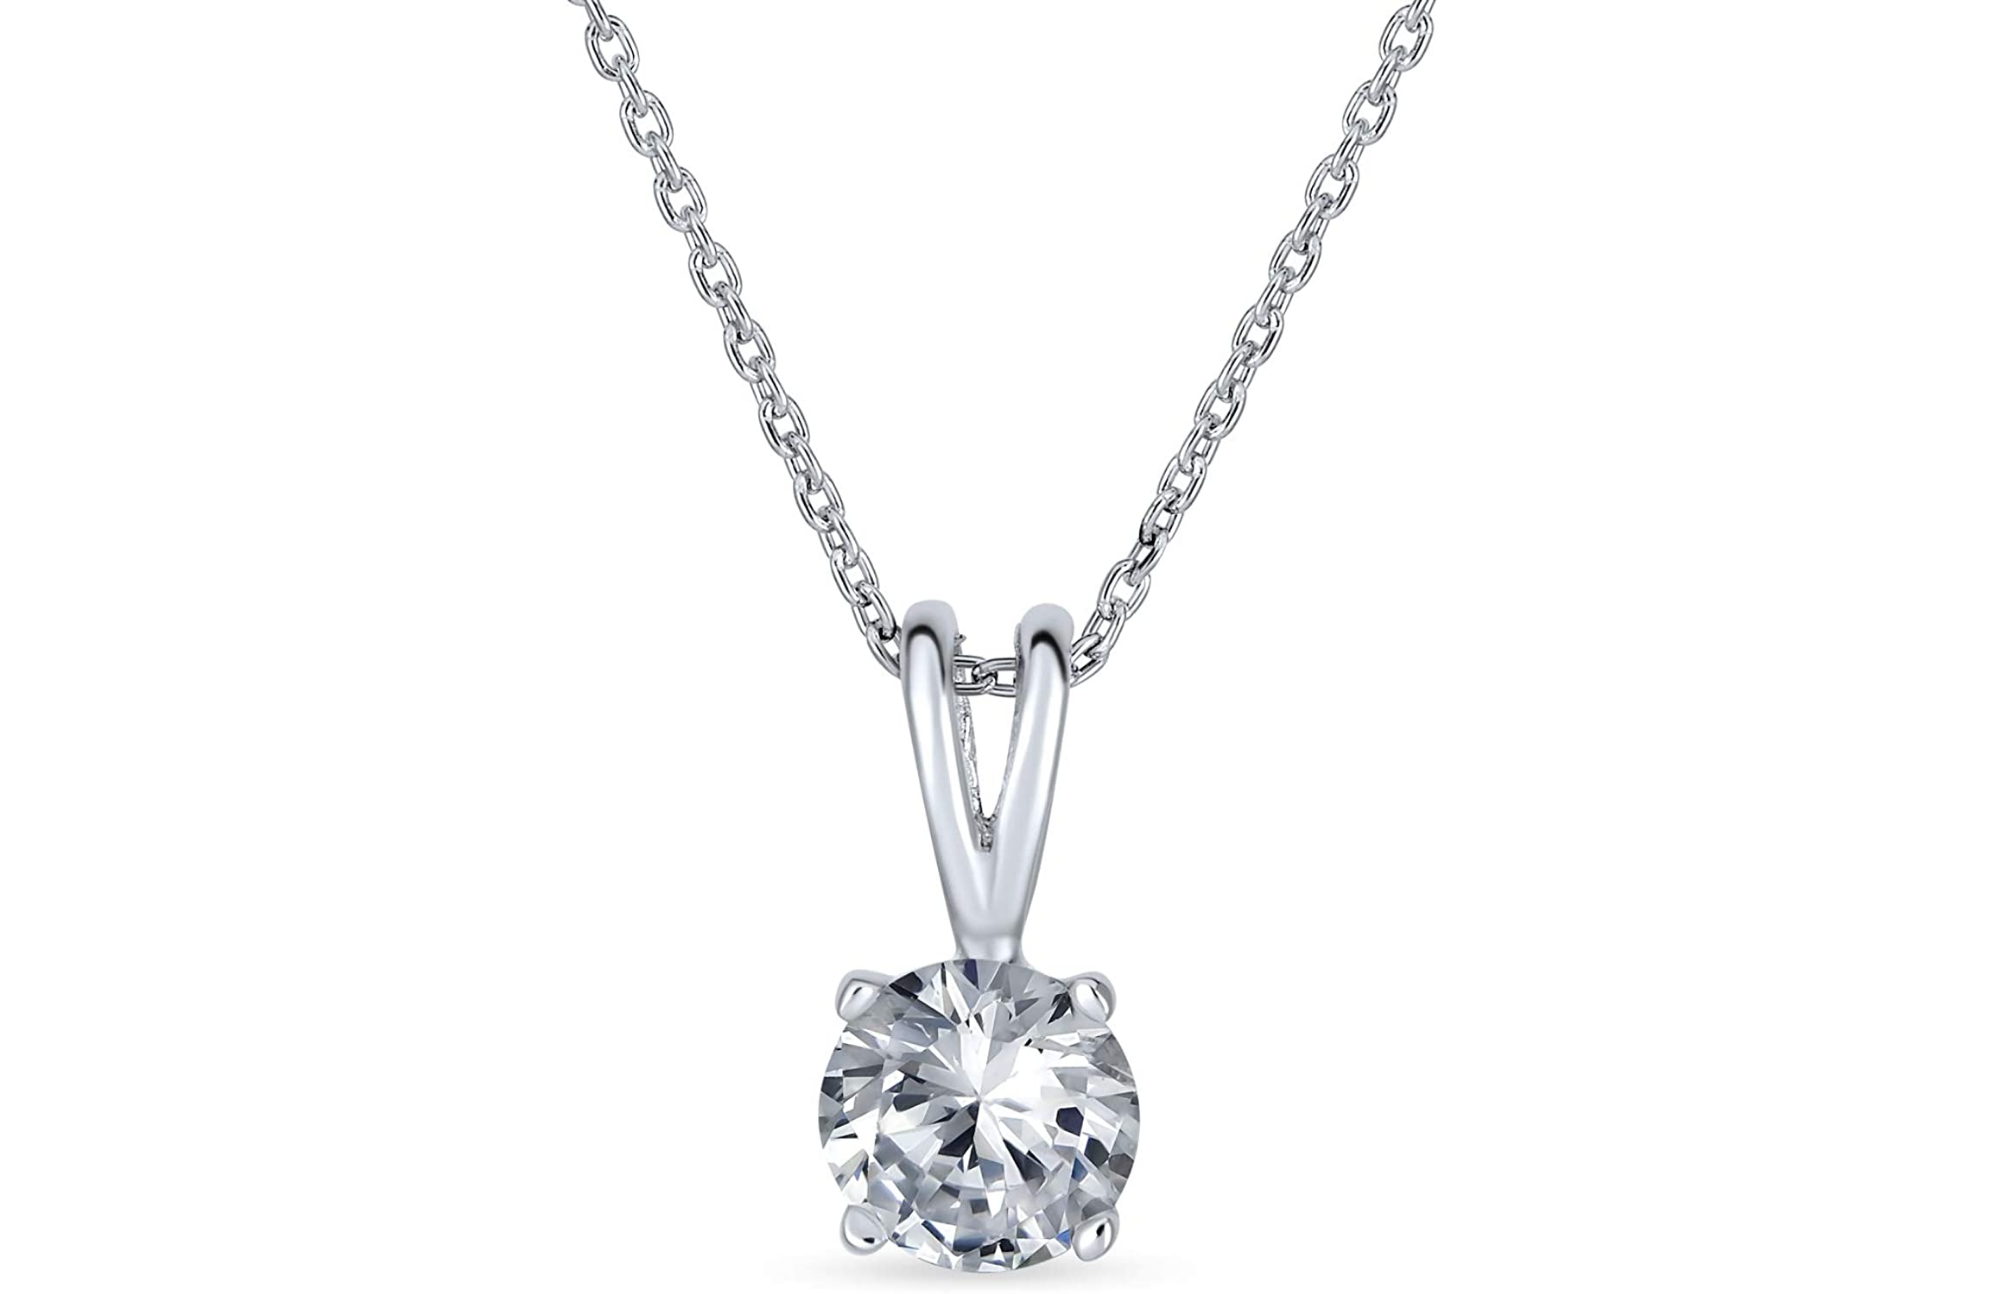 Round and sparkling CZ solitaire that is 7mm in diameter and hangs from a shiny 16-inch Rolo chain